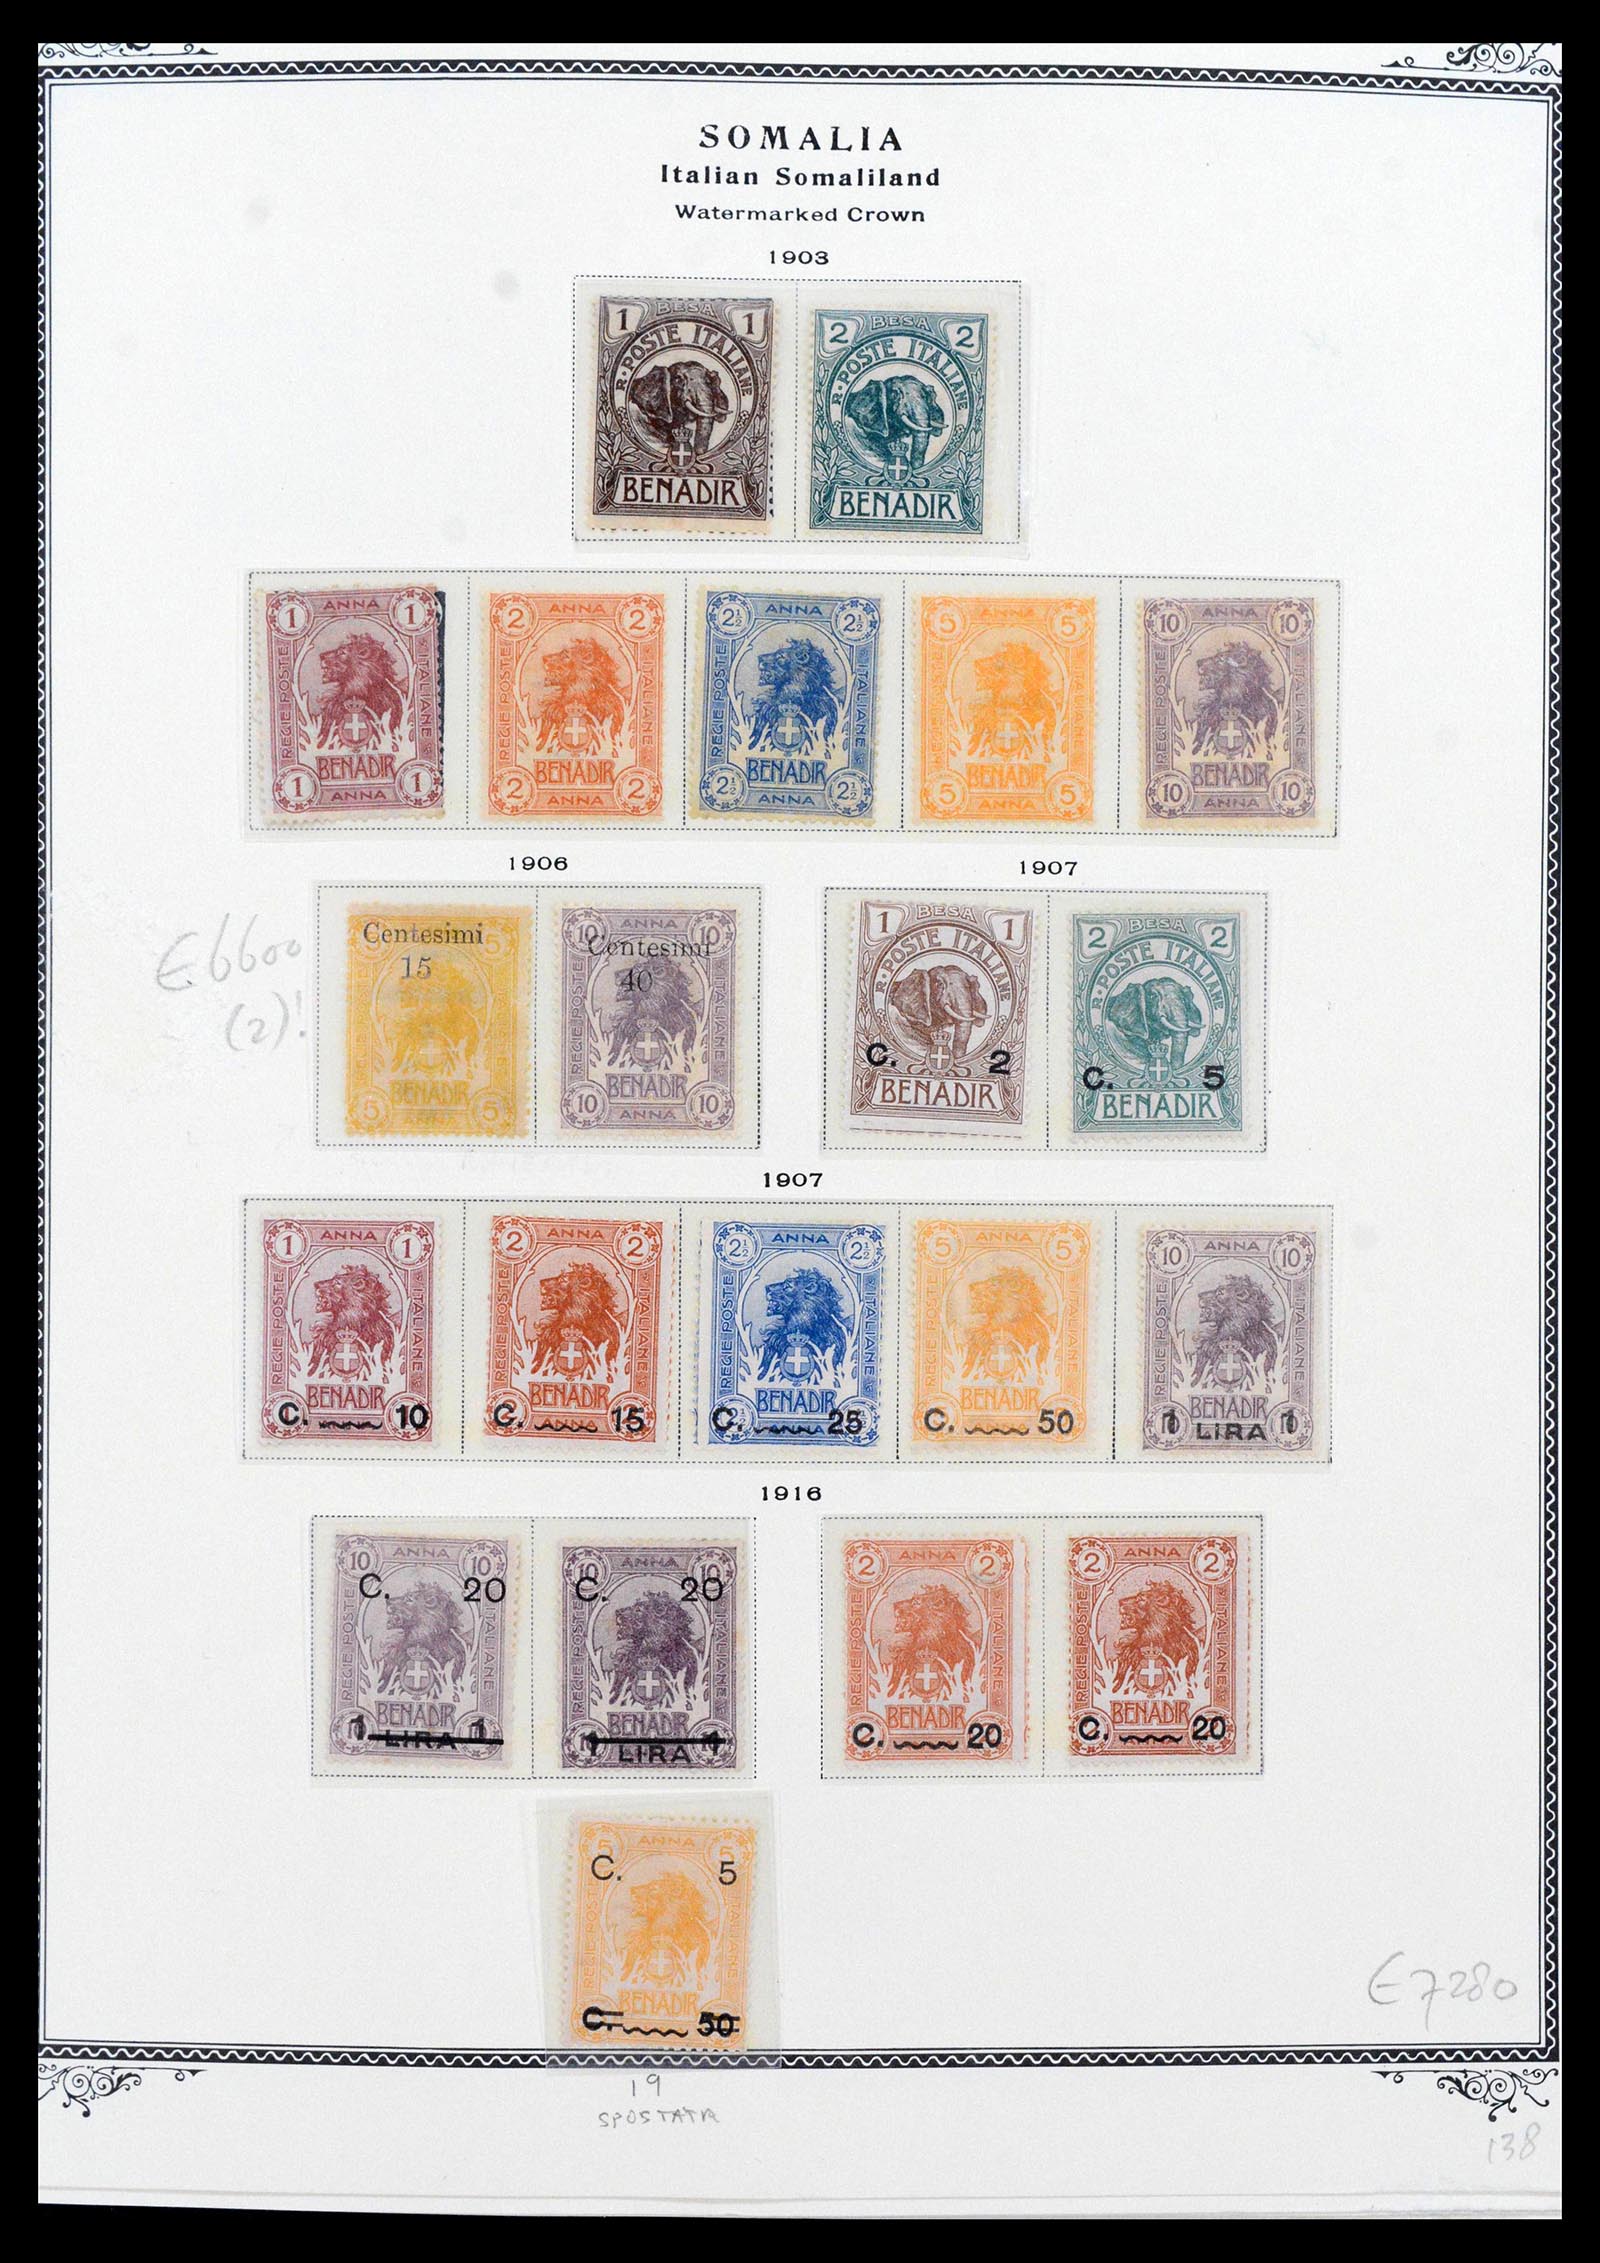 39011 0001 - Stamp collection 39011 Somalia complete 1903-1960.